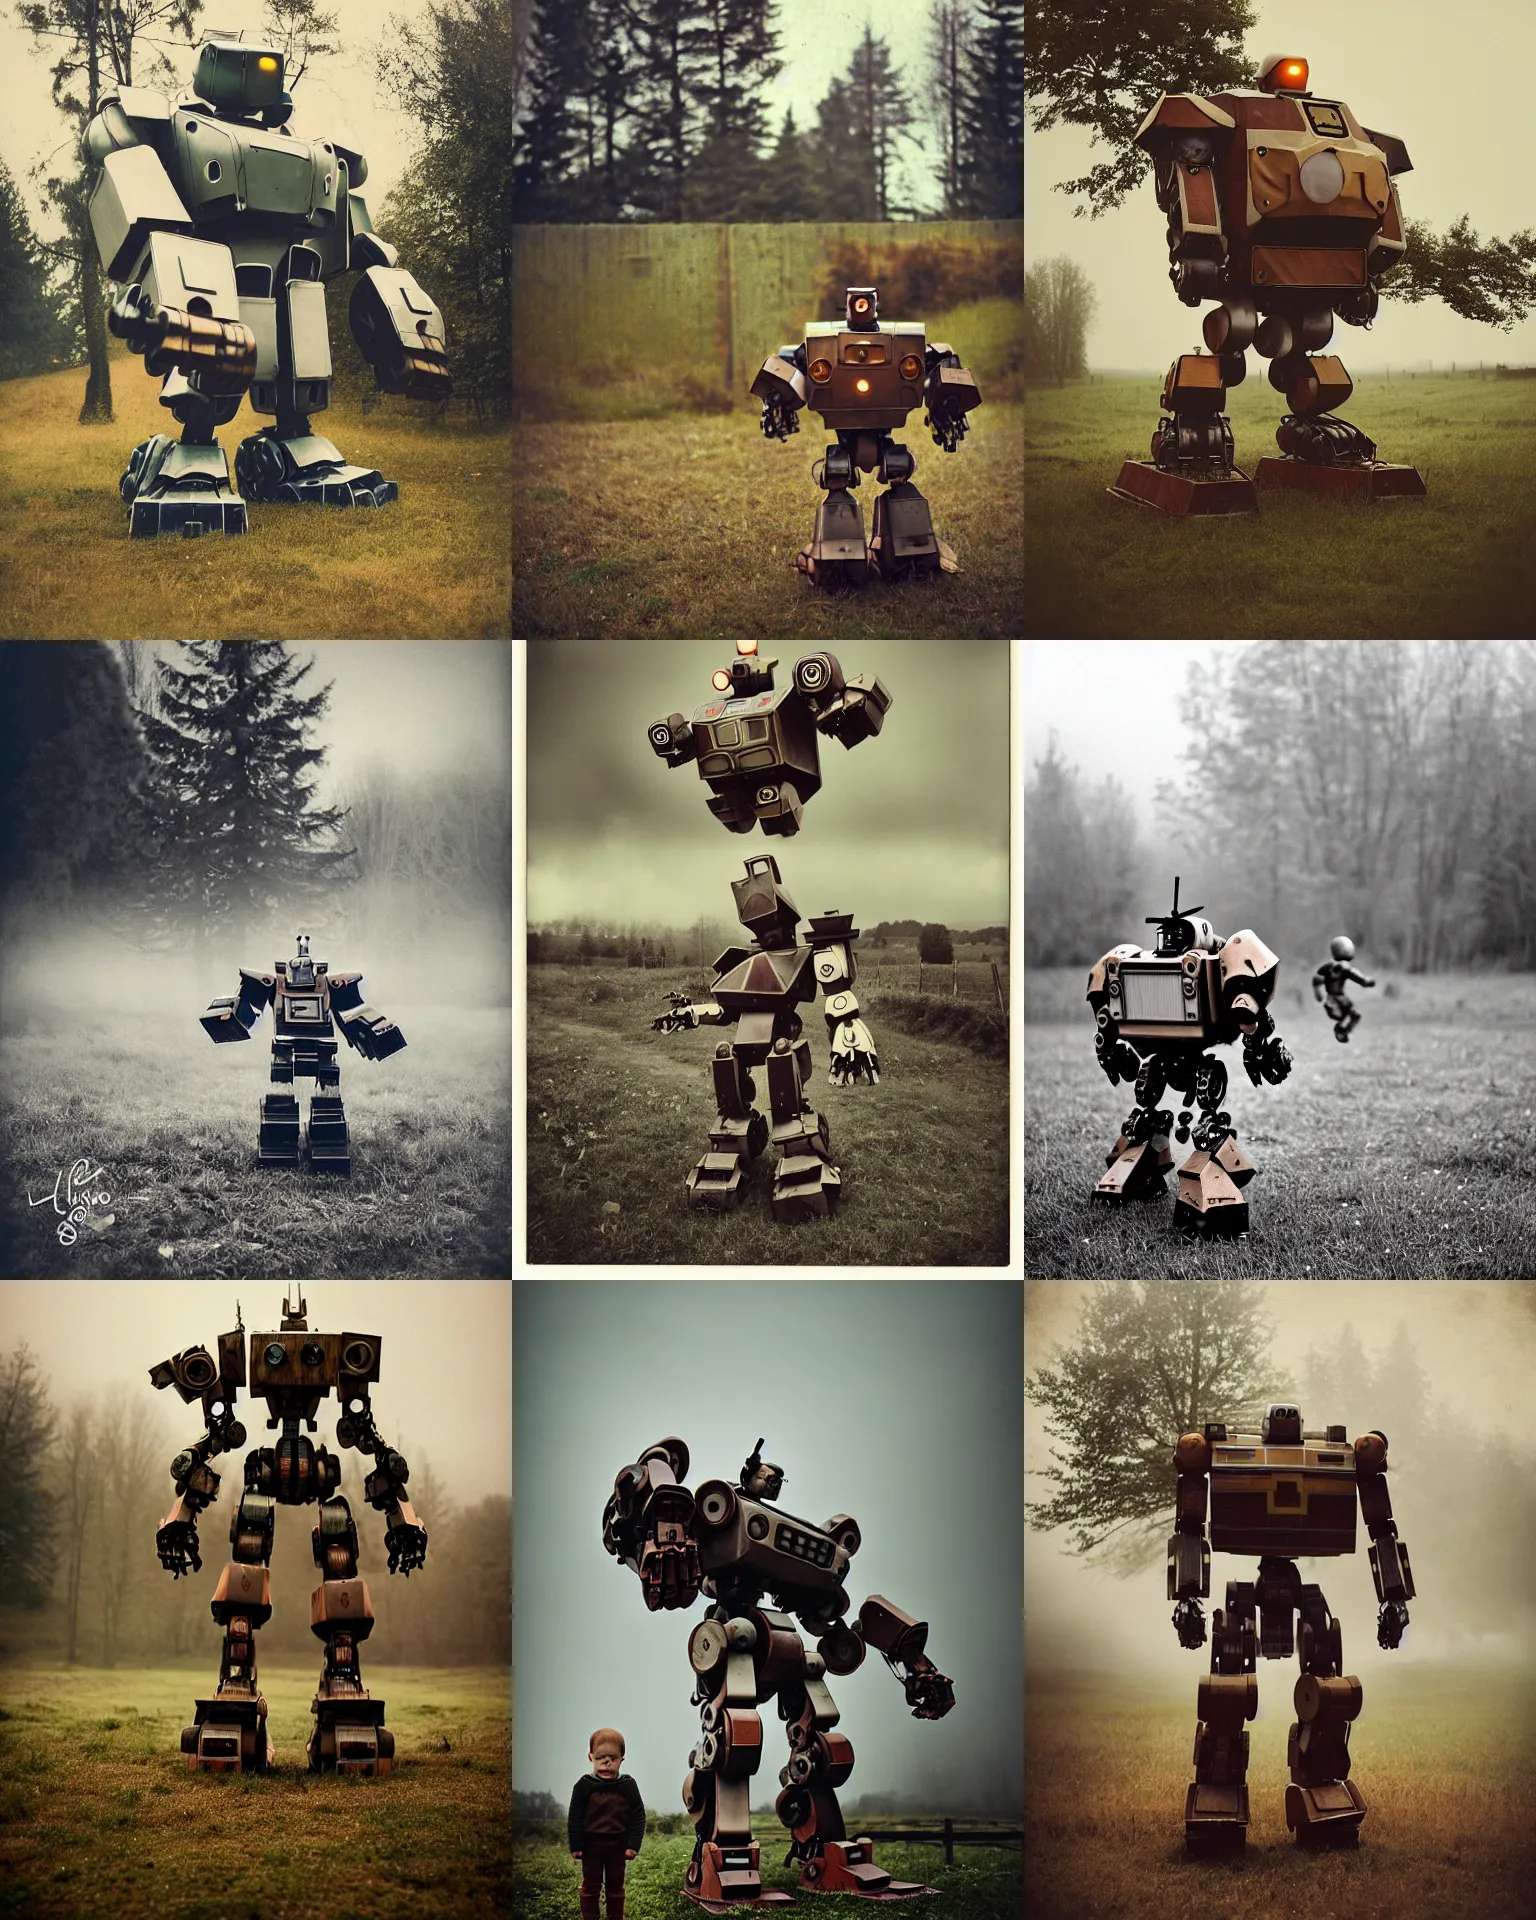 Prompt: giant oversized battle pose robot mech as giant baby on a village, wooden fence and tree remains in far background, hero pose, Cinematic focus, Polaroid photo, vintage, neutral colors, soft lights, foggy, natural detaild grainy photo, by Steve Hanks, by Serov Valentin, by lisa yuskavage, by Andrei Tarkovsky